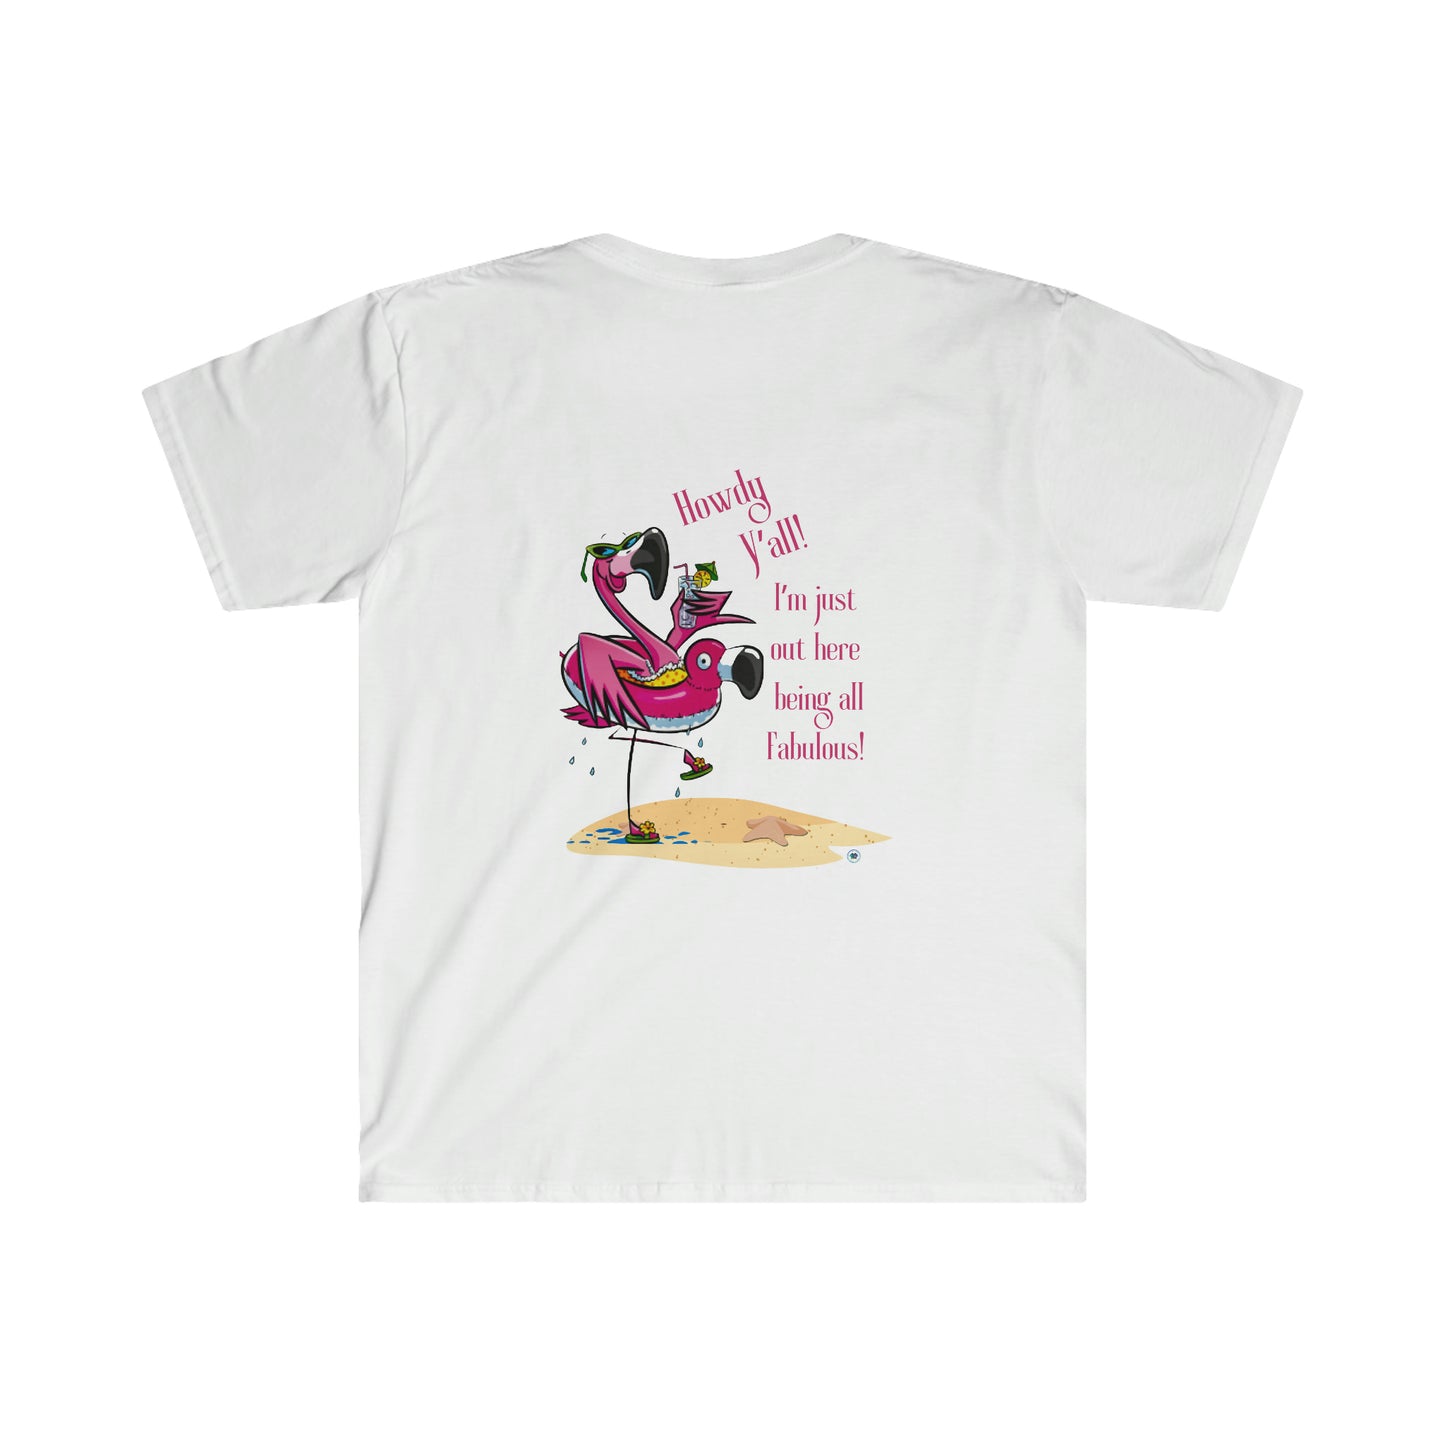 ‘Howdy Y’all! I’m just out here being all fabulous!’ Printed Front & Back Unisex Softstyle T-Shirt